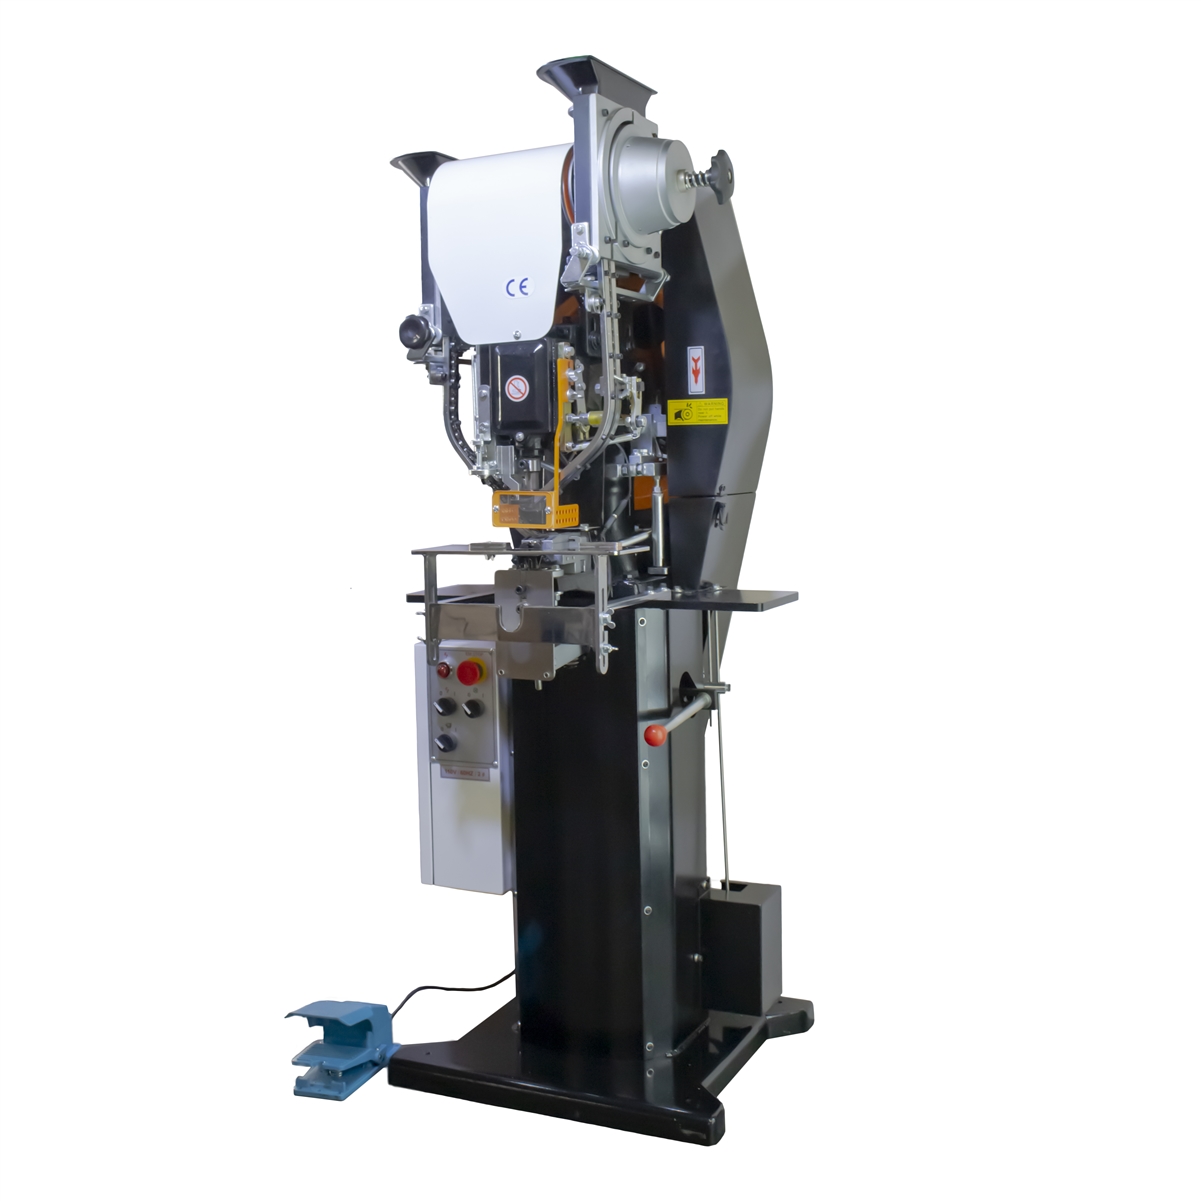 Dropship Pneumatic Grommet Press Machine to Sell Online at a Lower Price